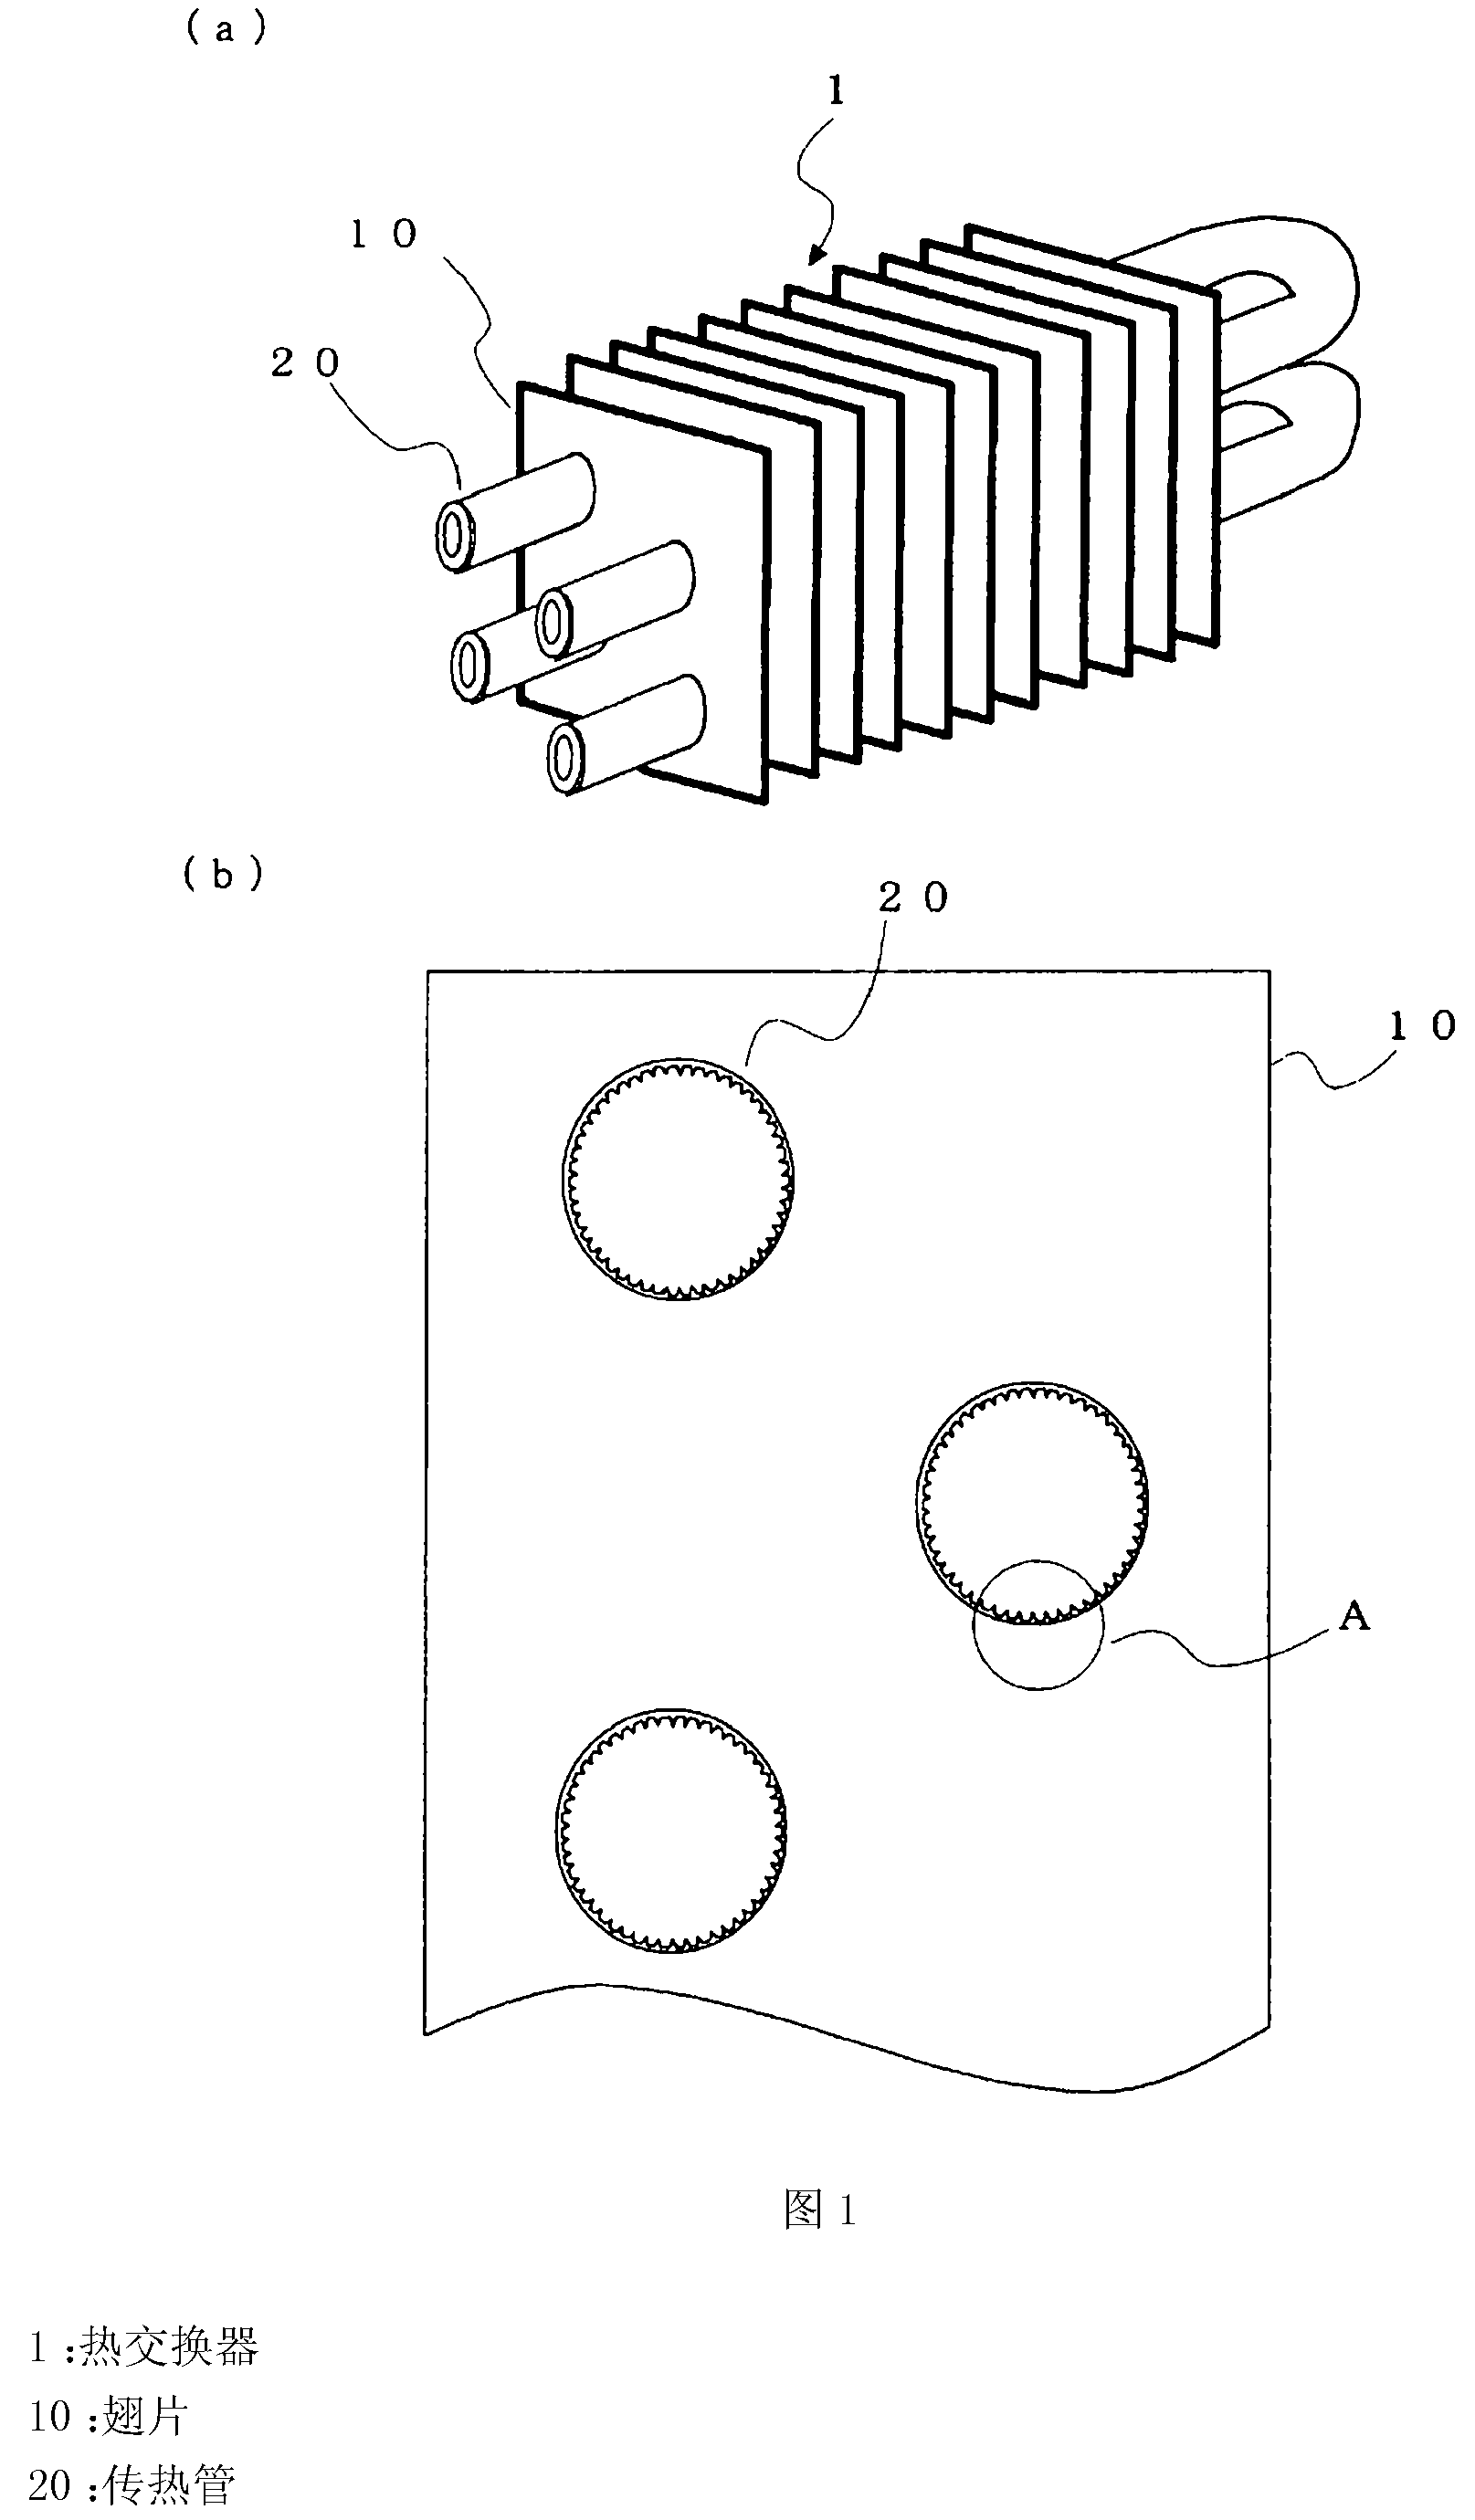 Heat transfer tube for heat exchanger, heat exchanger, refrigerating cycle apparatus, and air conditioning apparatus